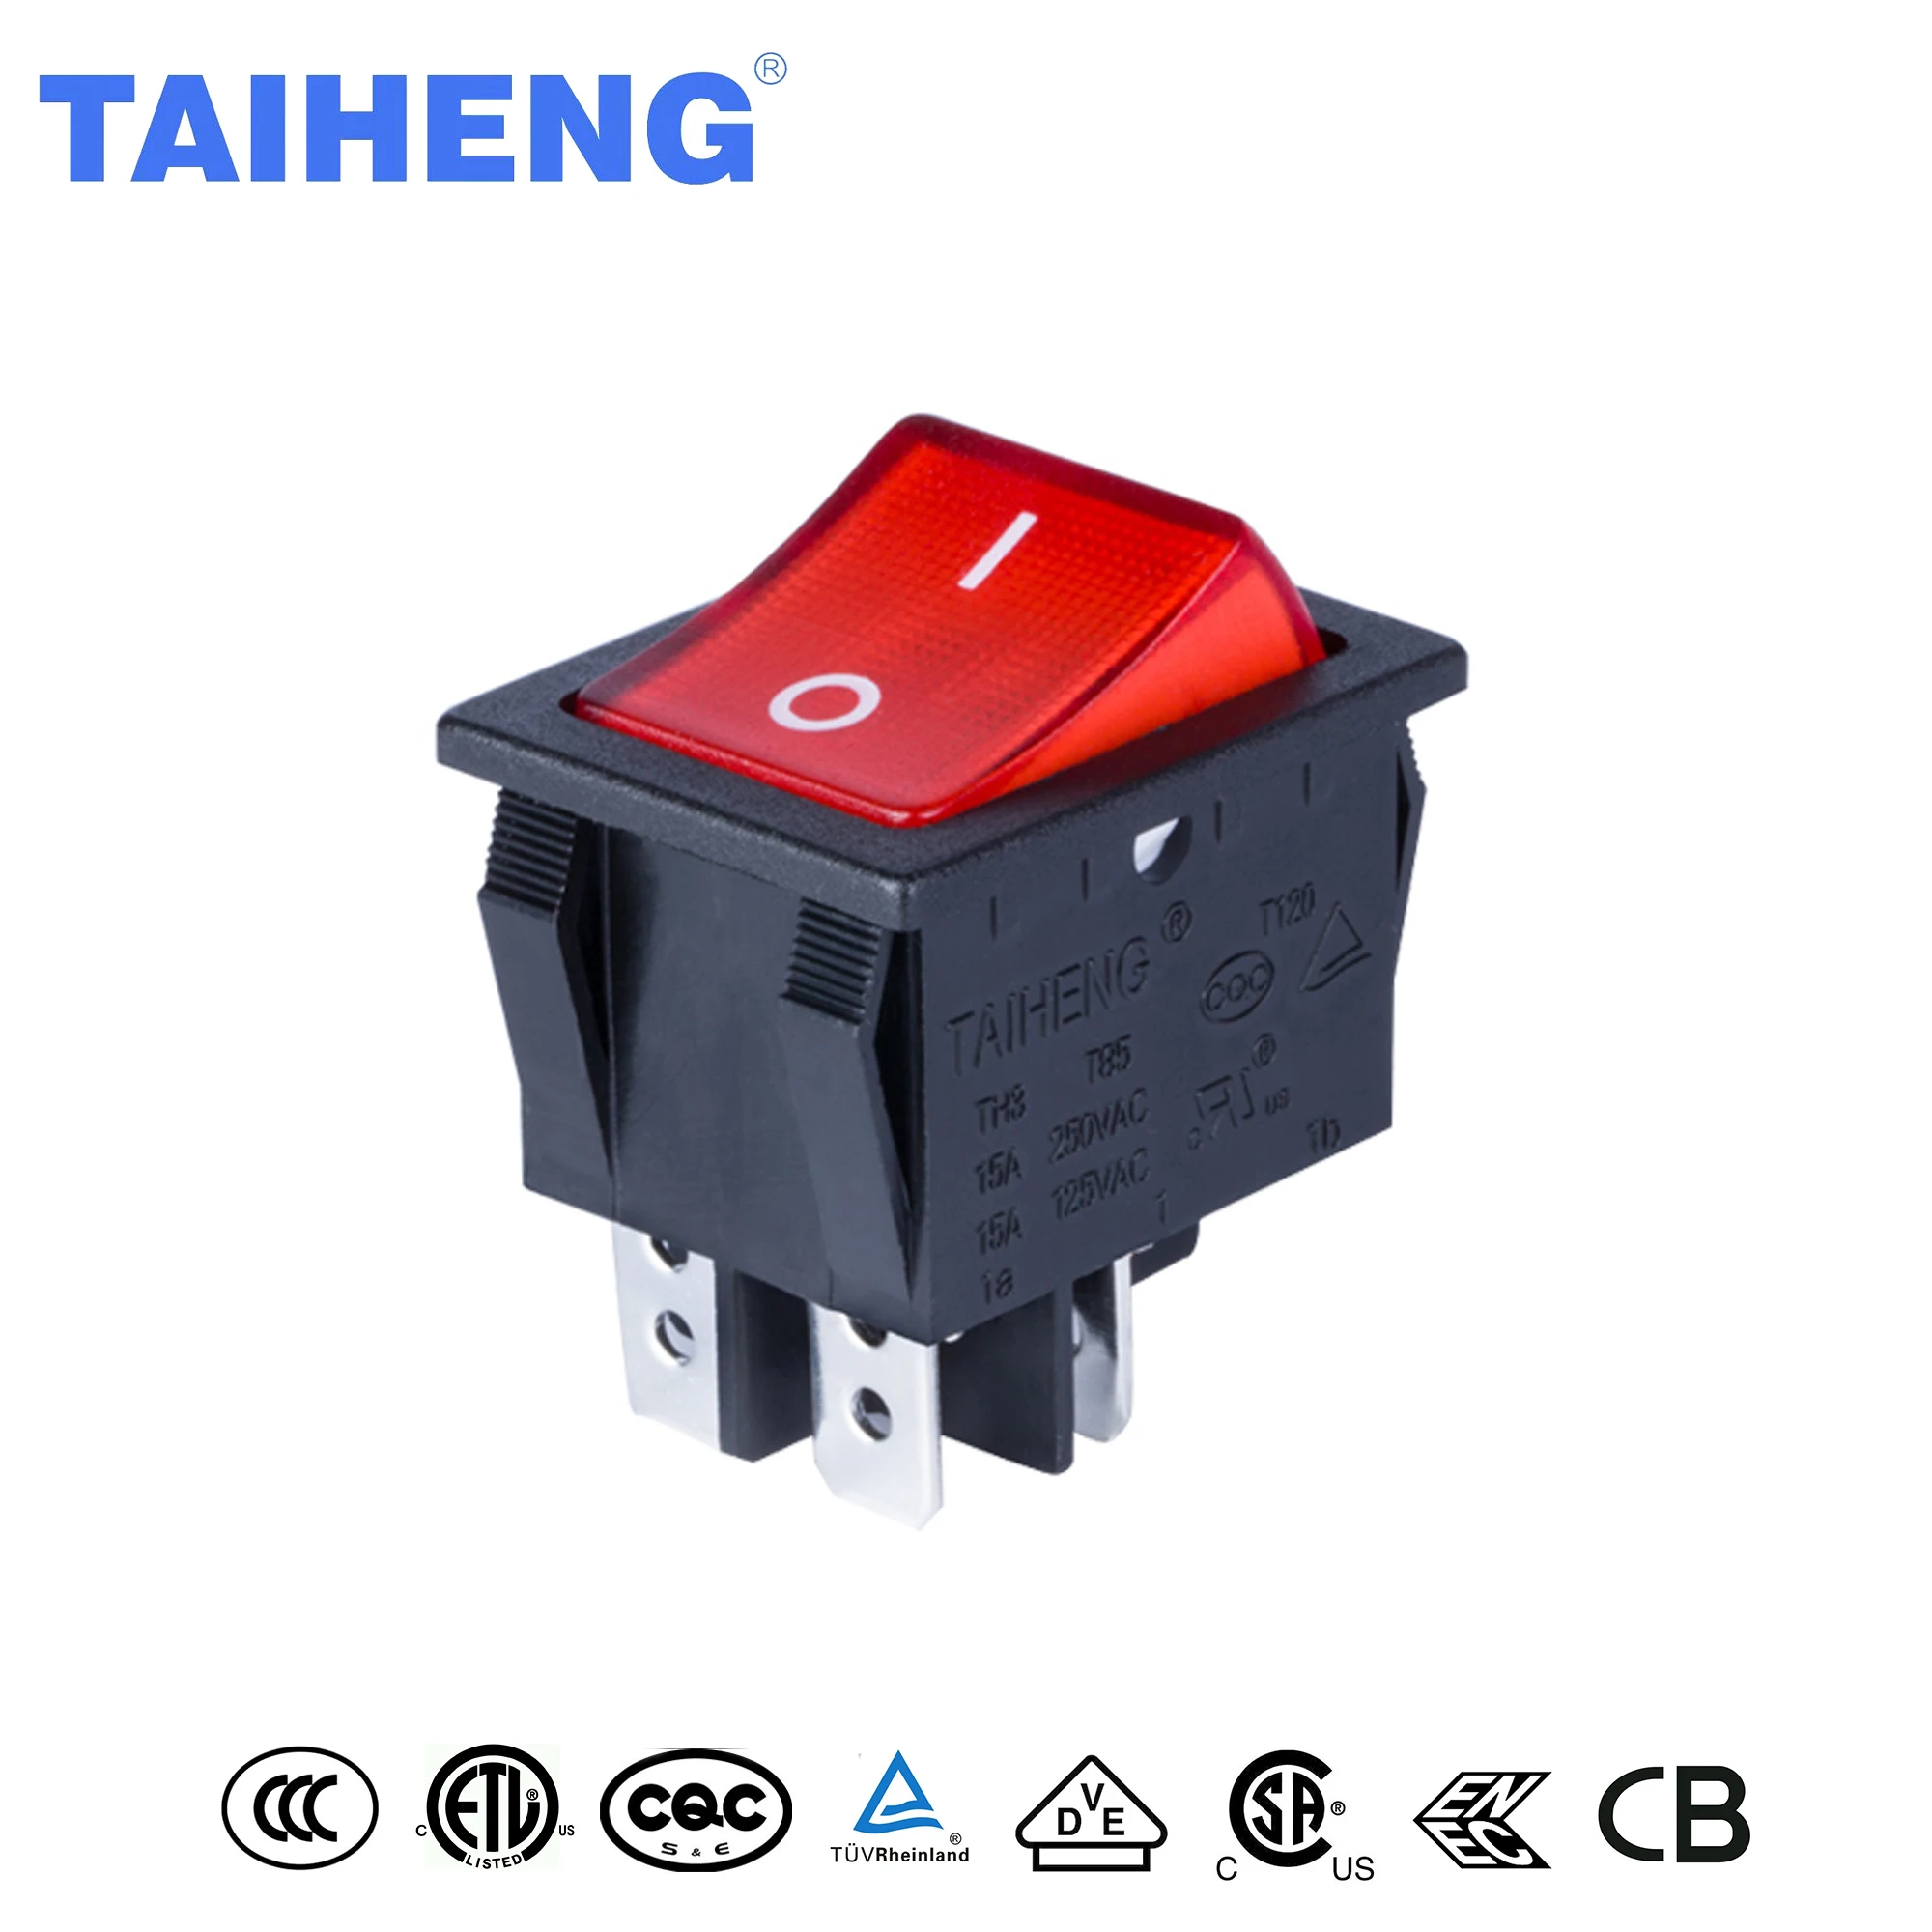 KCD4 waterproof rocker switch 3A 250V toggle switch 4 pins on -off power rocker switches